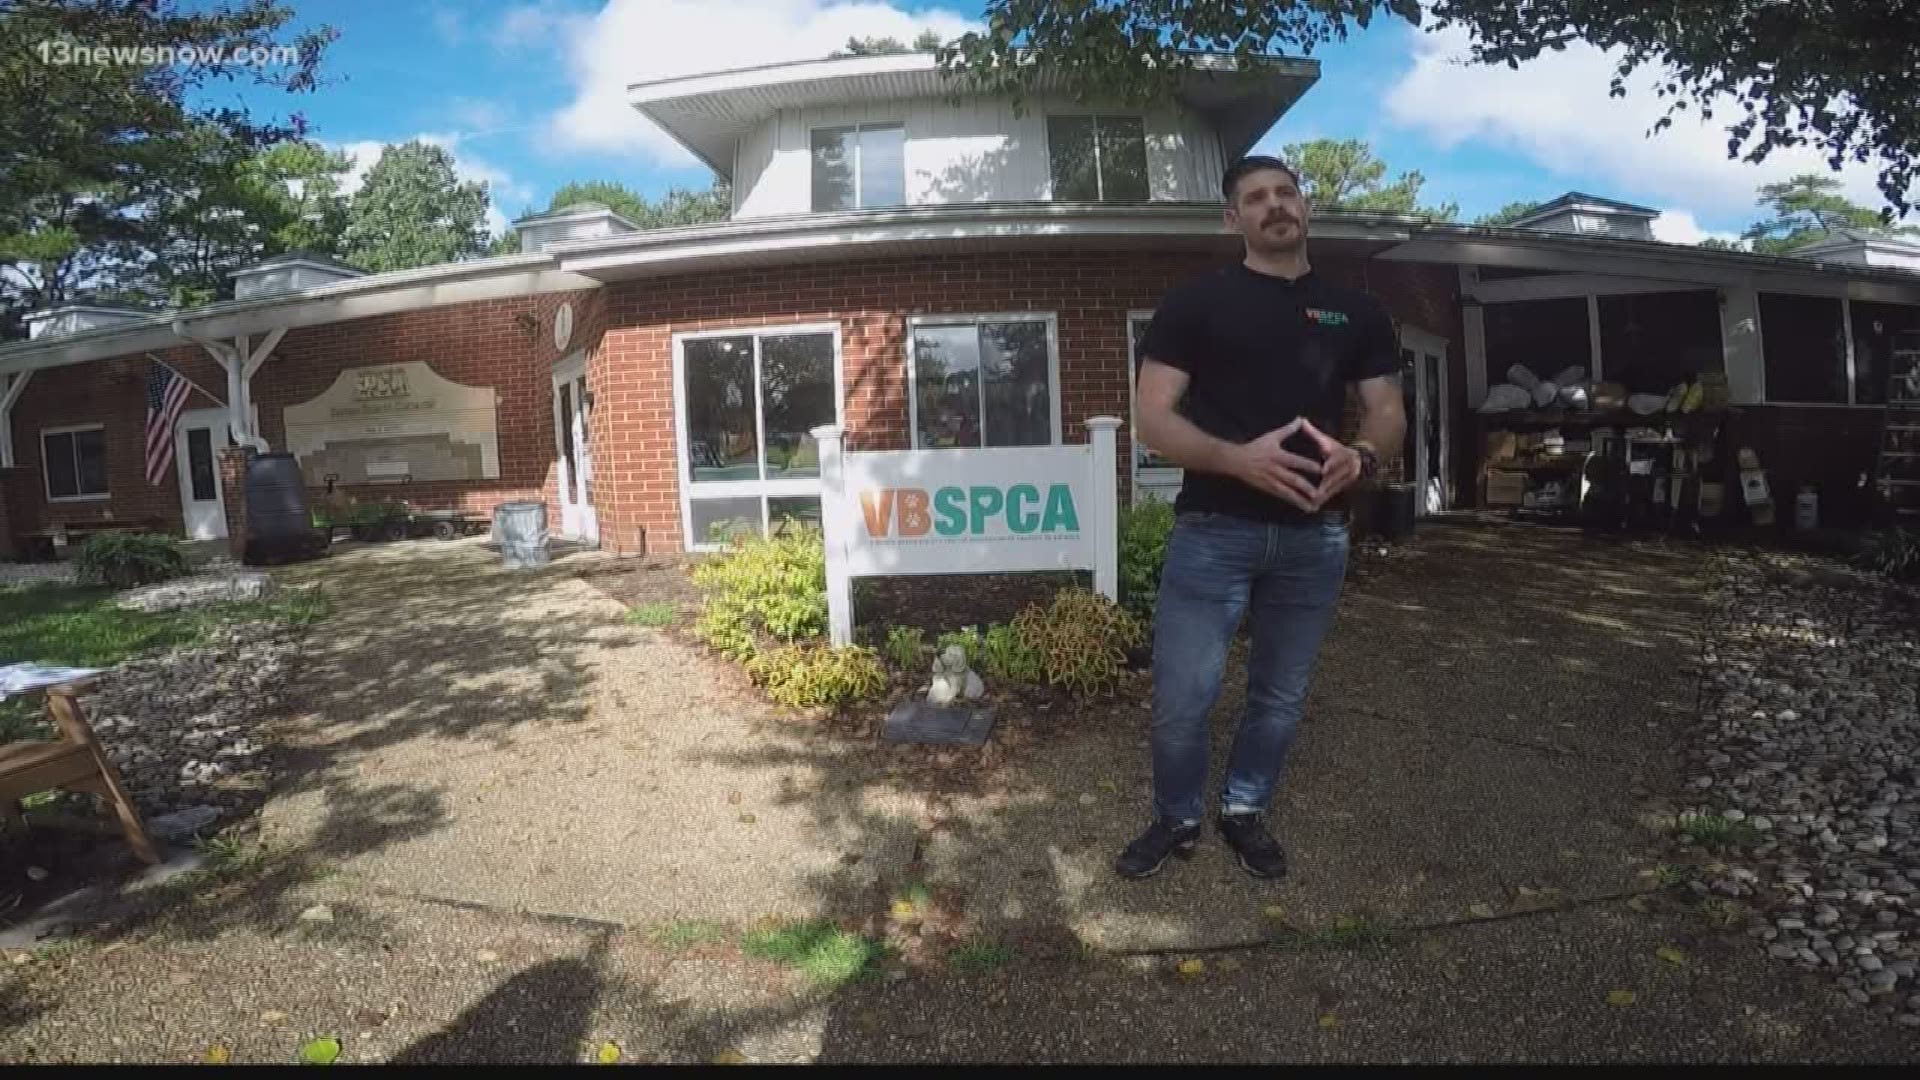 13News now reporter Megan Shinn spoke to officials at the Virginia Beach SPCA to find out the best ways to prepare for your pet as Hurricane Florence continues to approach the East Coast.